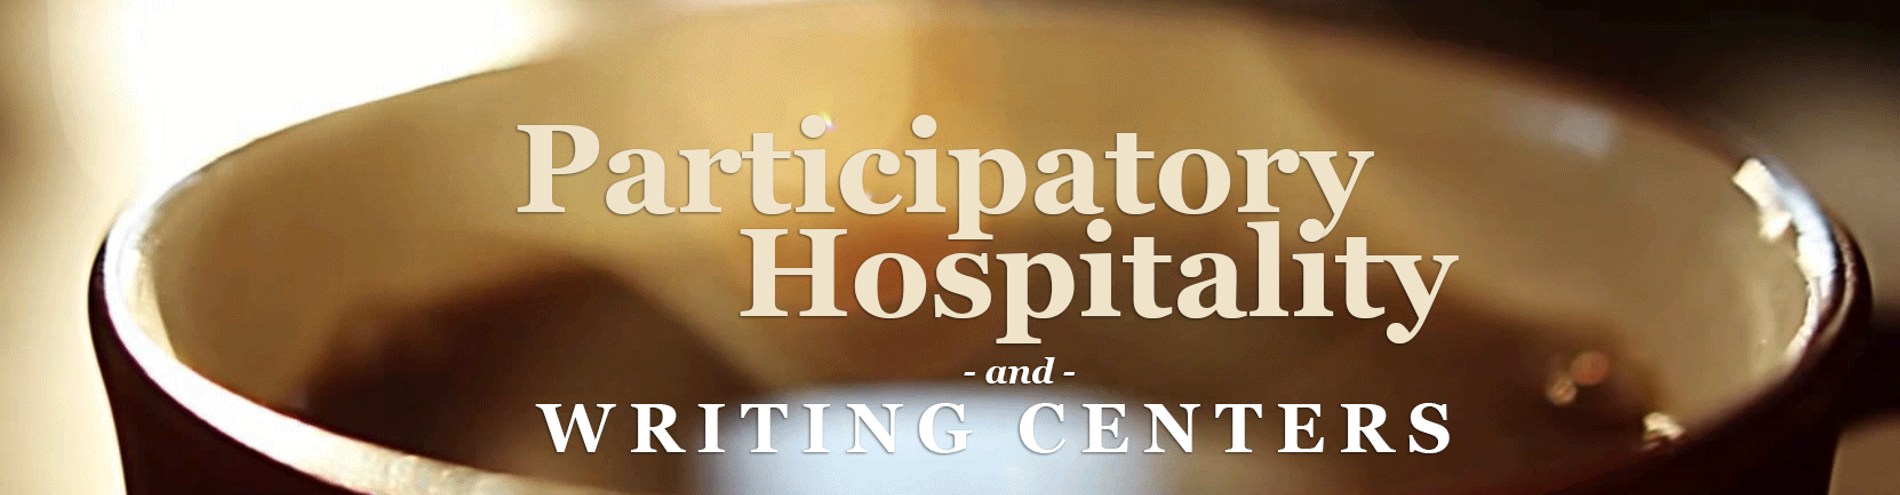 Participatory Hospitality and Writing Centers